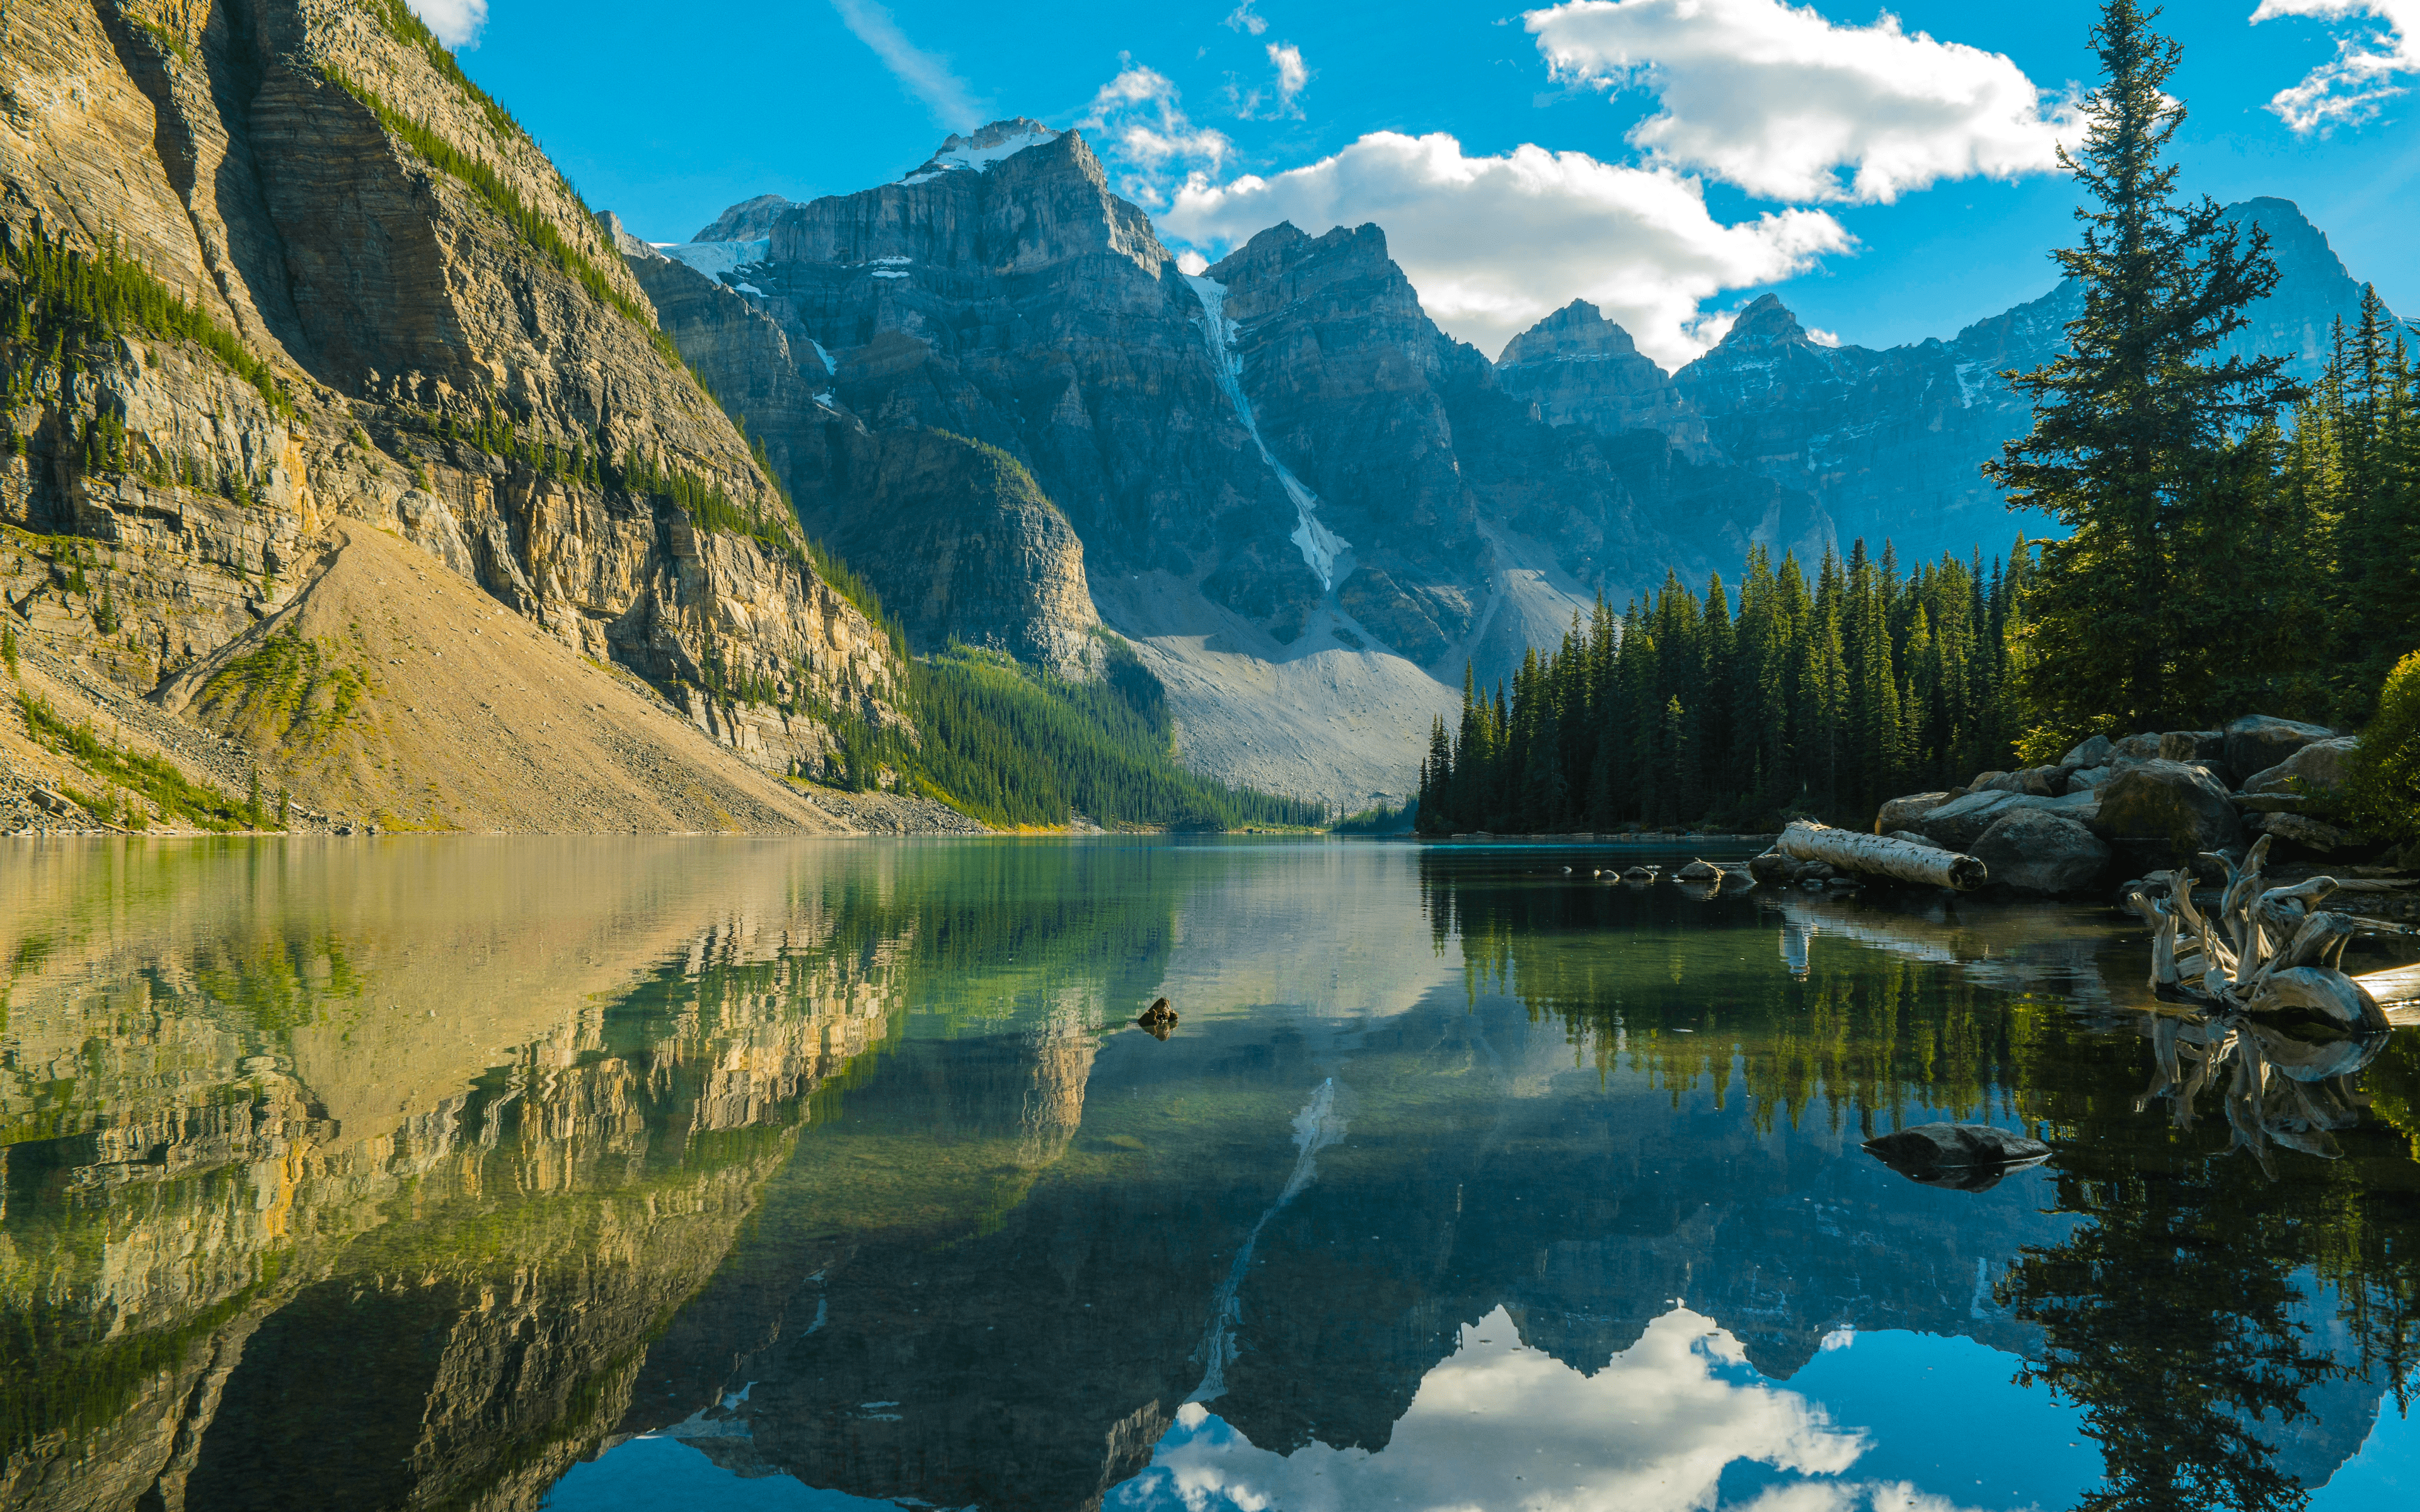 Nature Landscape Mountains Clouds Sky Trees Plants Wood River Reflection Water Rocks Lake Louise Can 3840x2400